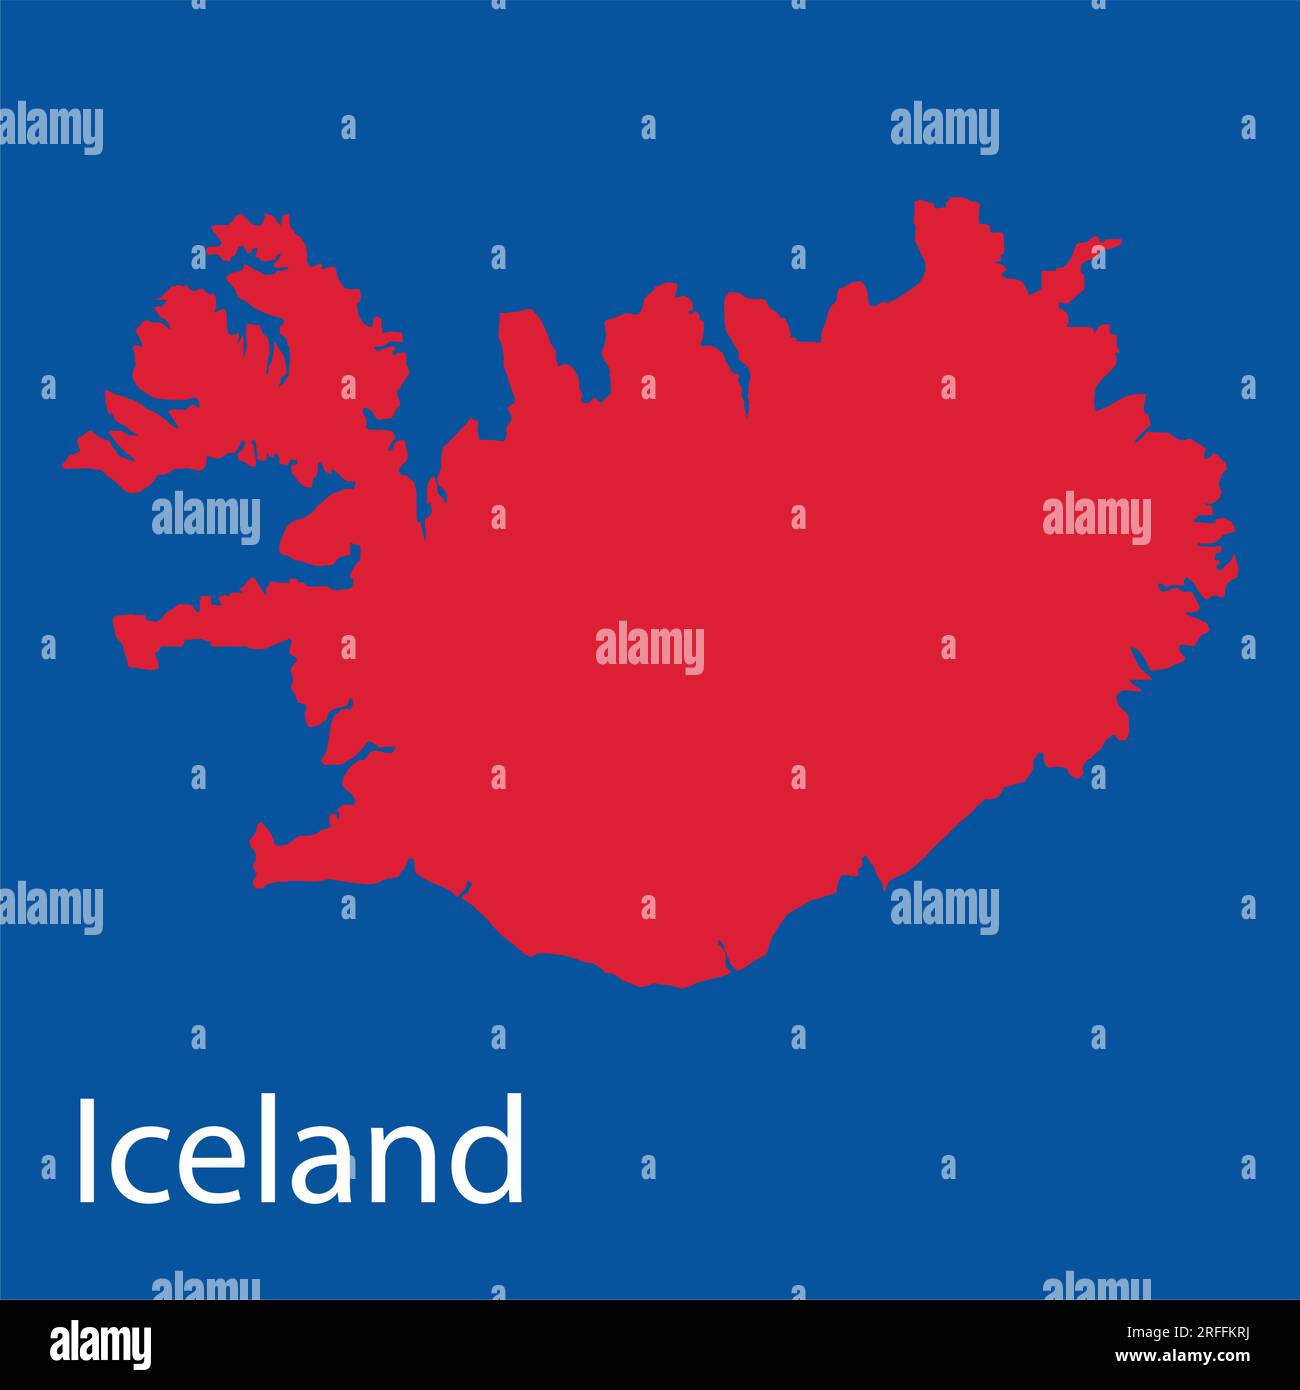 iceland map icon vector illustration design Stock Vector